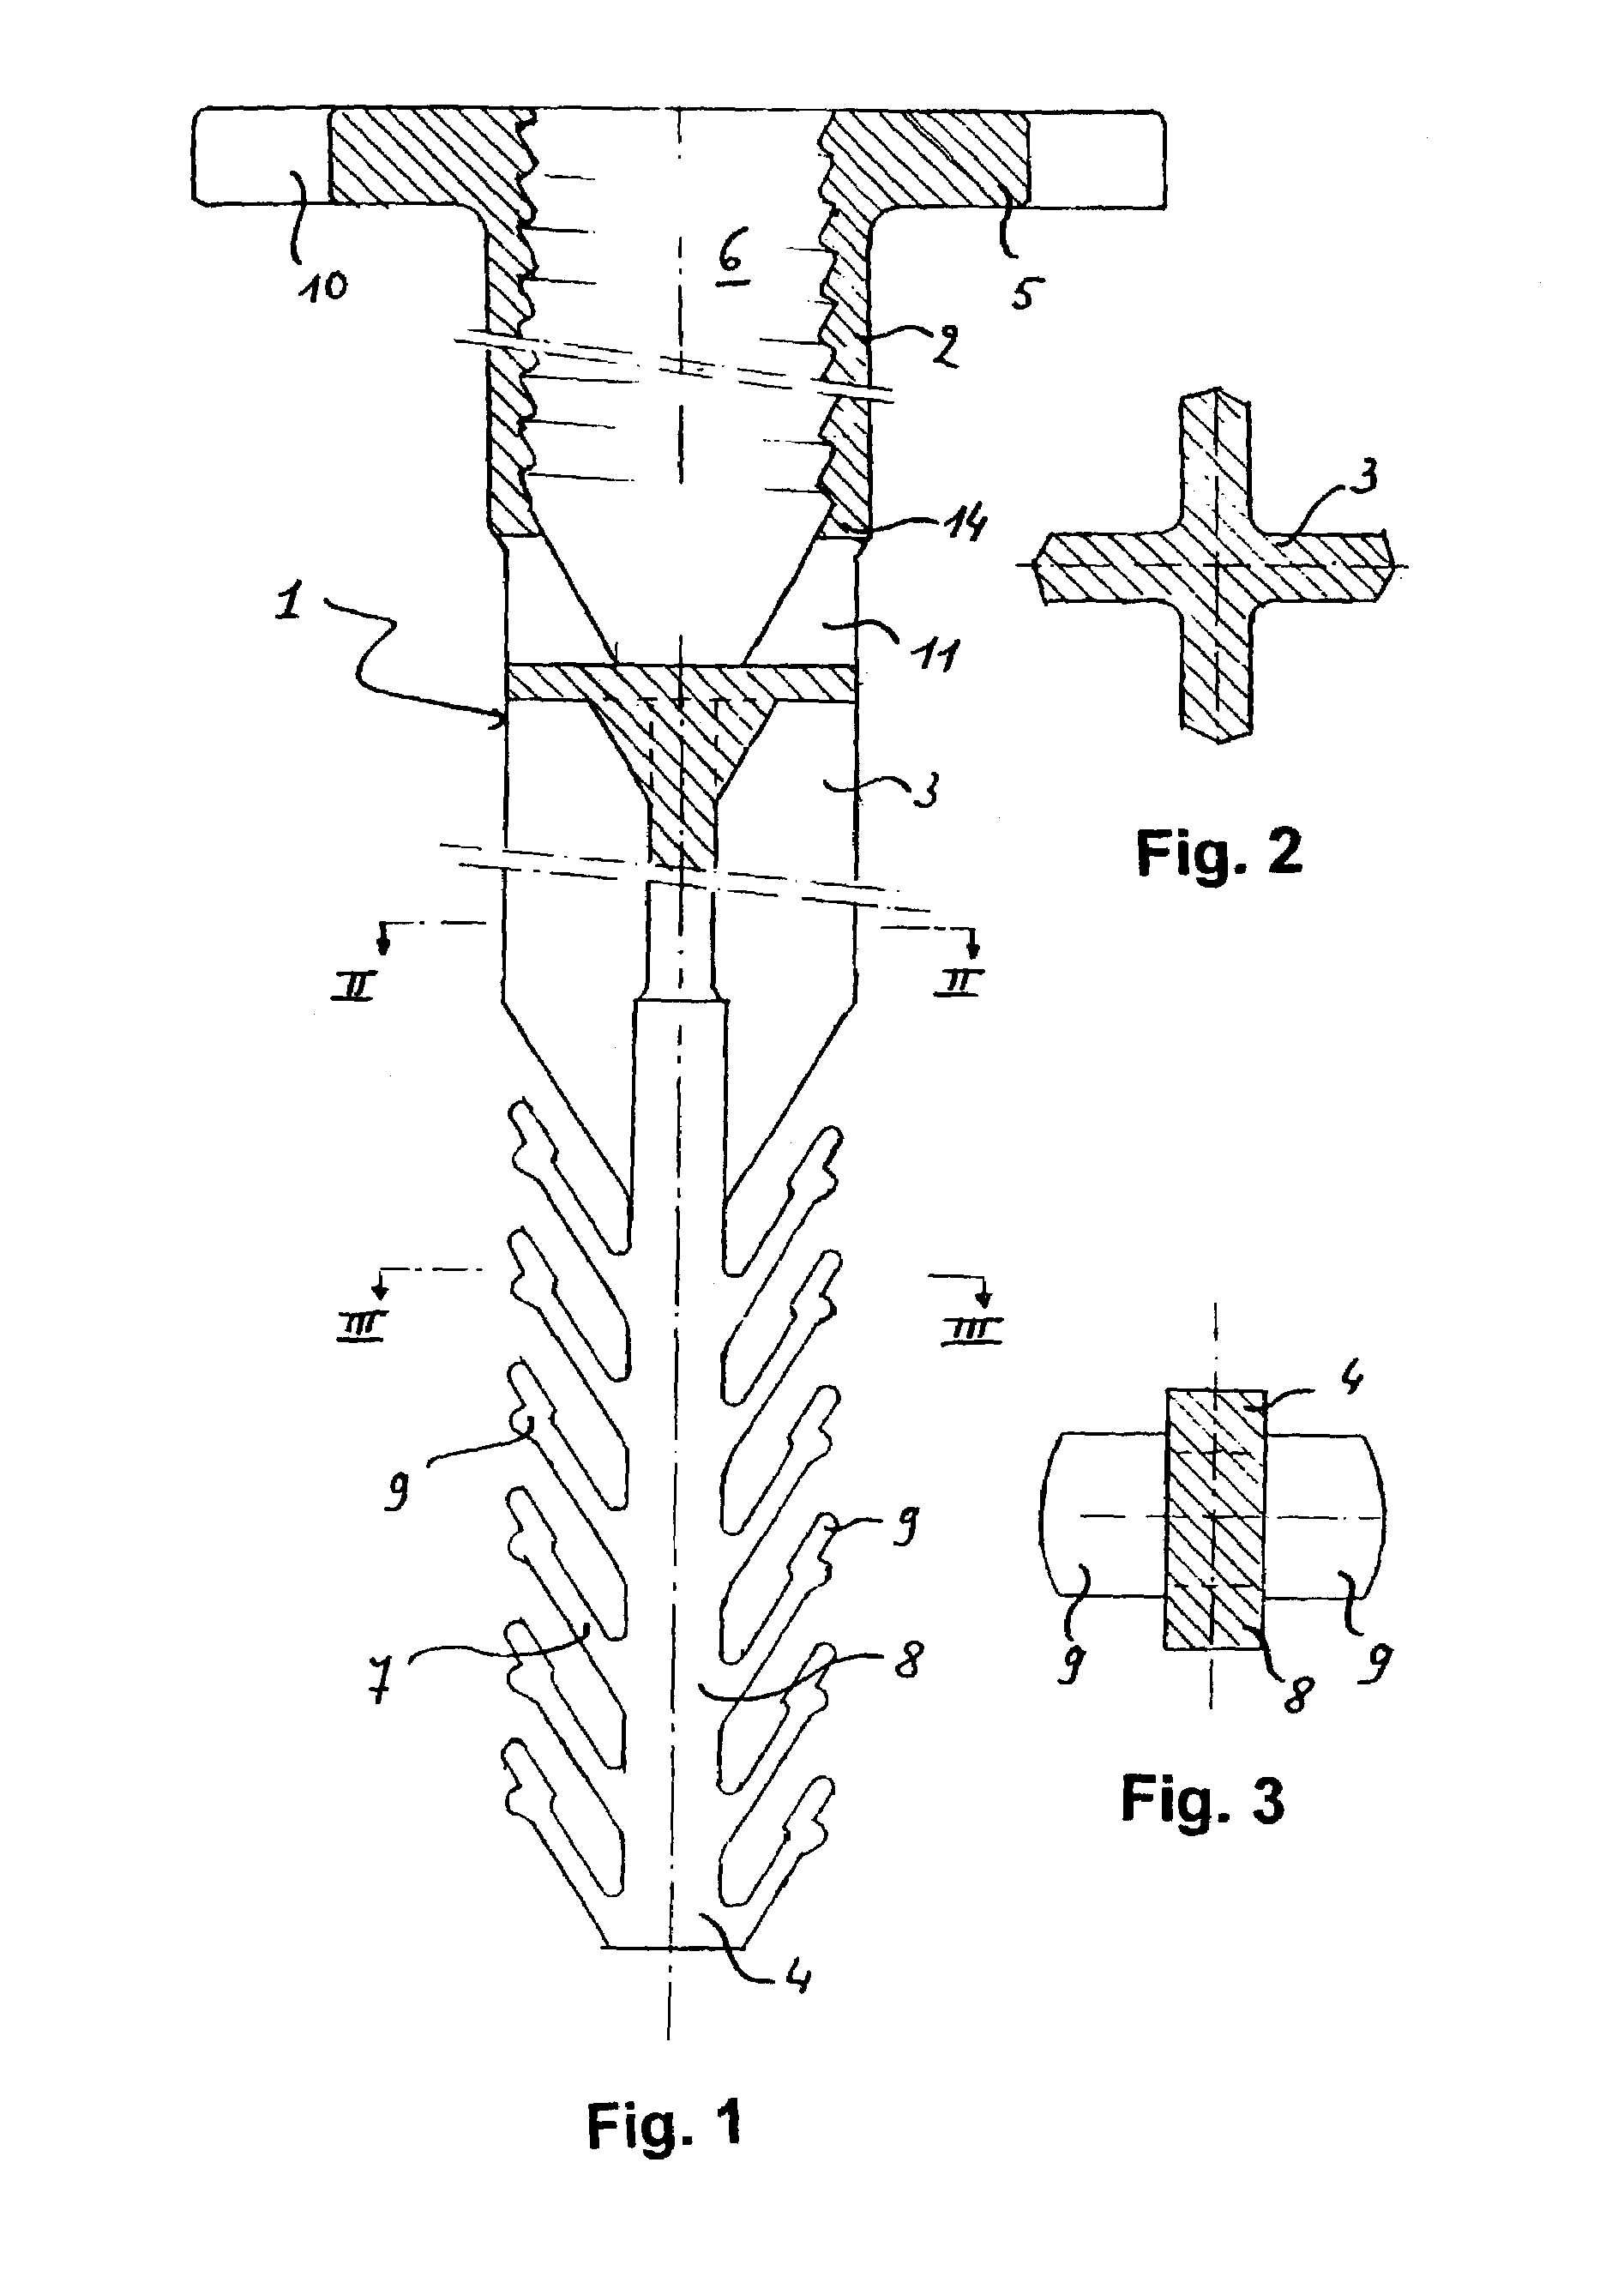 System for connecting elements